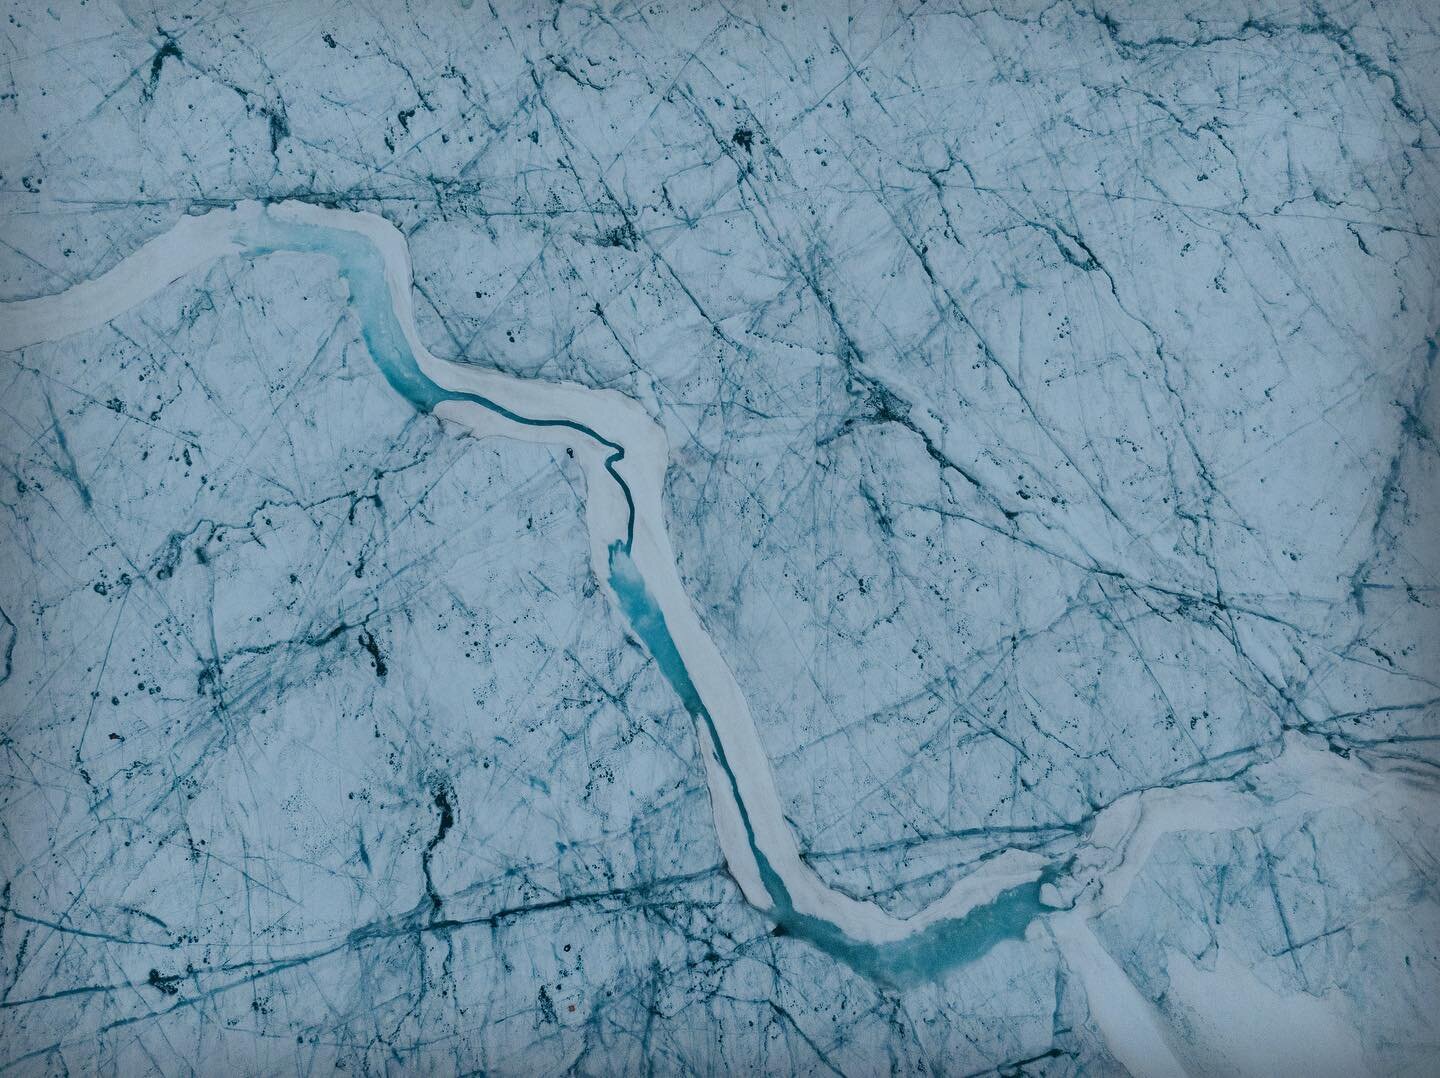 On this hot August day, let&rsquo;s dream of ice. This is from 69&deg; N, on the Greenland Ice Sheet, crisscrossed with crevasse traces and ice streams. For scale, if you look carefully at the tiny dots at the bottom you&rsquo;ll see a person and the